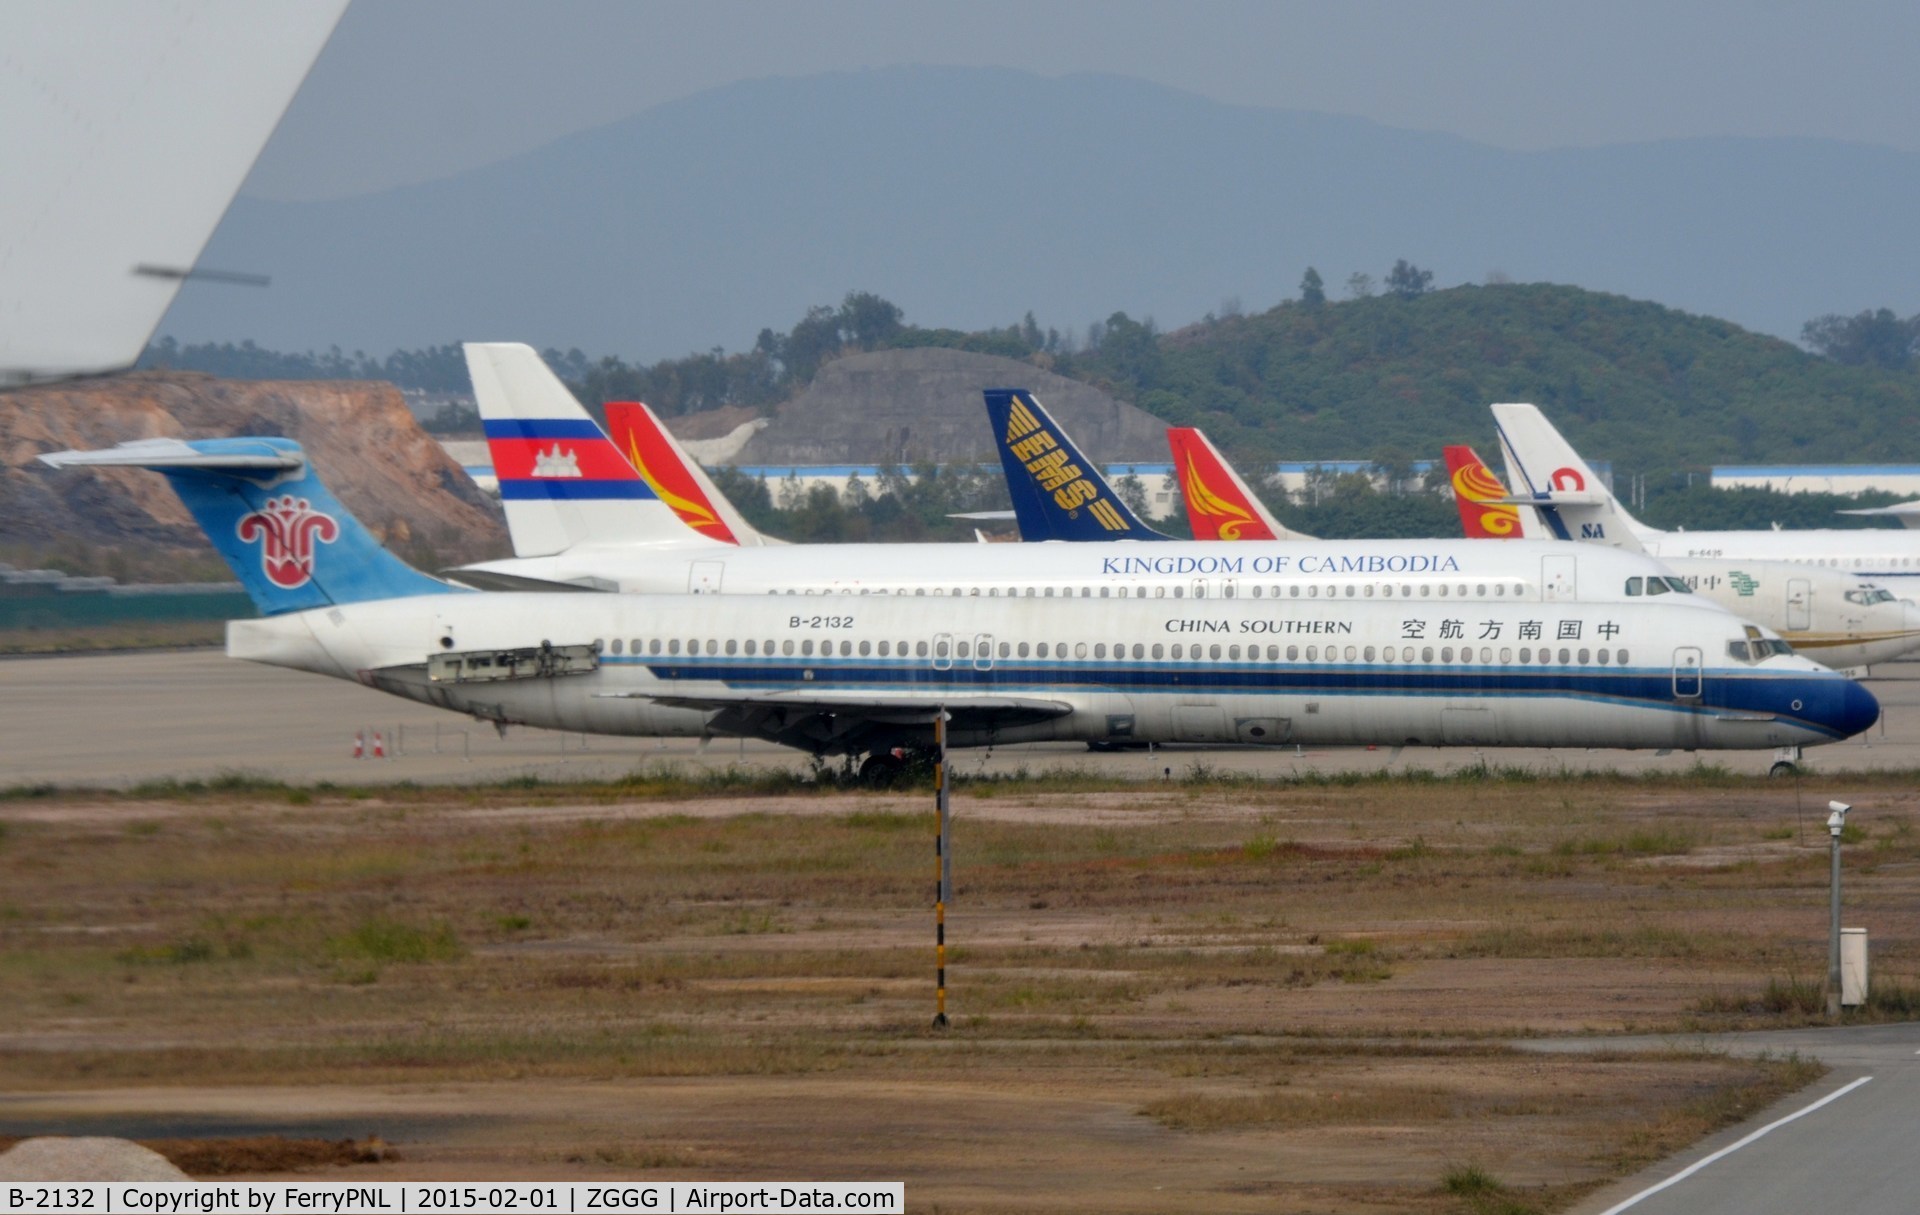 B-2132, 1990 McDonnell Douglas MD-82 (DC-9-82) C/N 49516, Decommissioned and stored at Guangzhou.